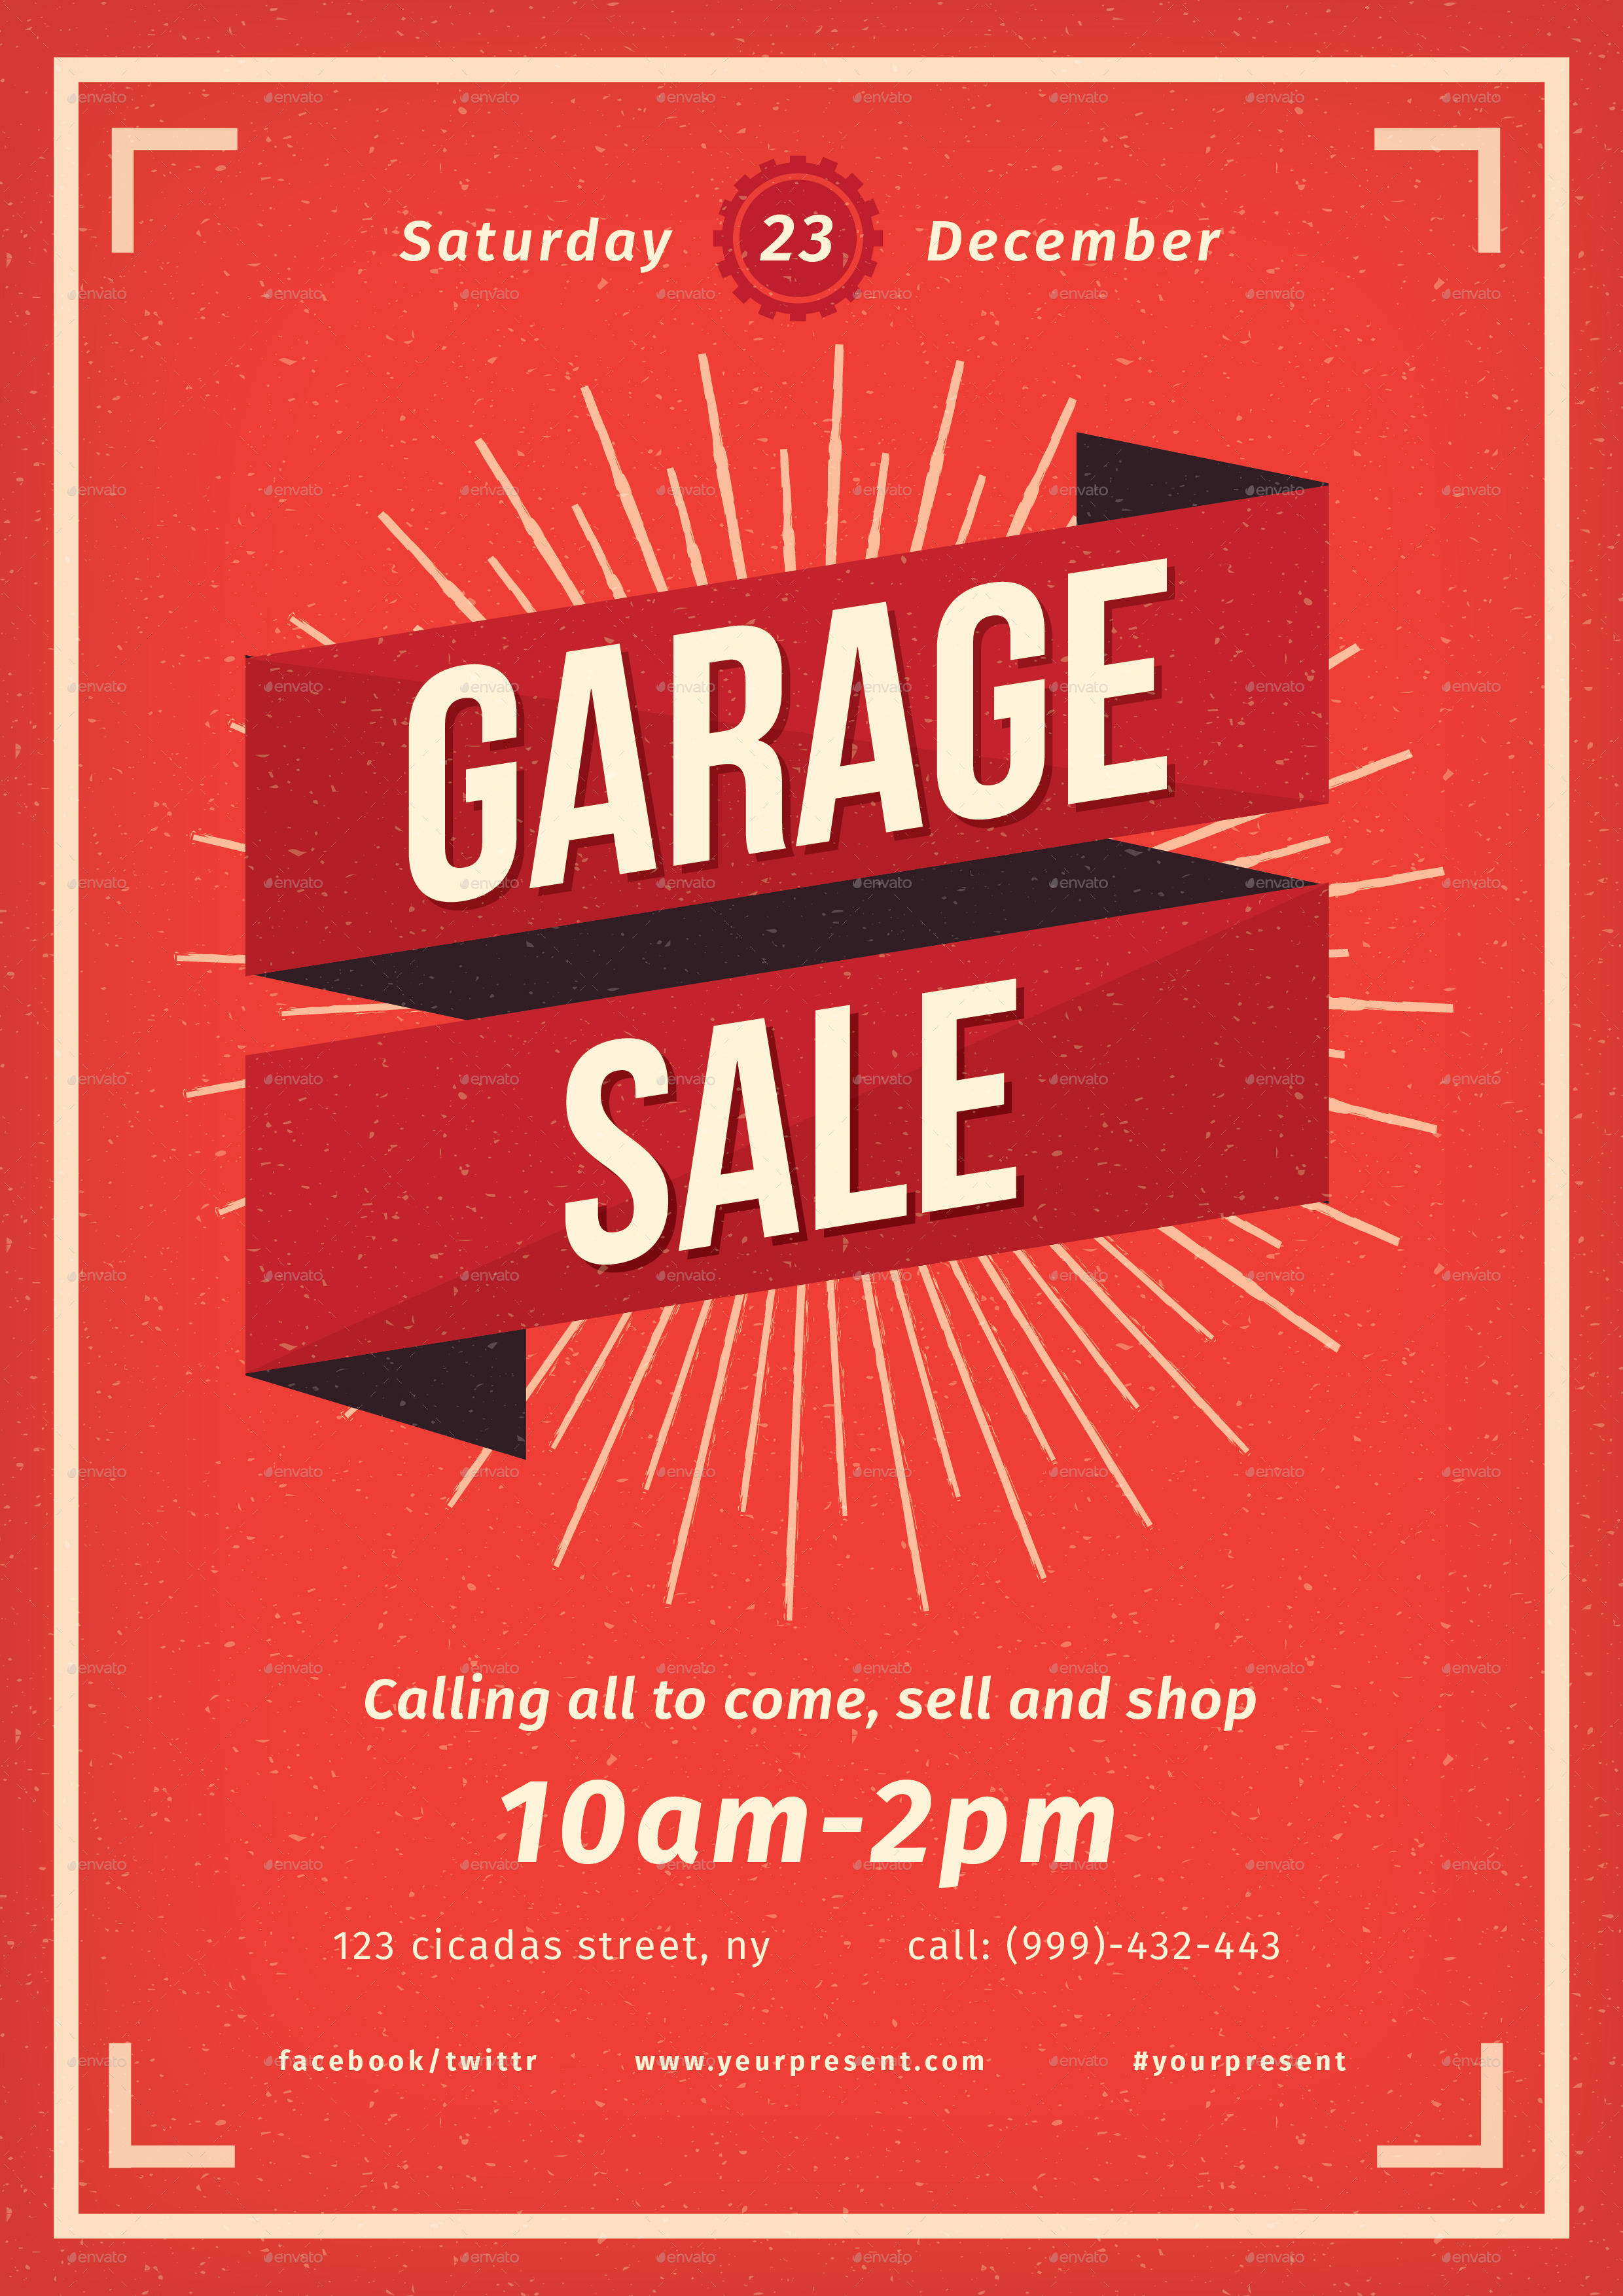 Vintage Garage Sale flyer by lilynthesweetpea  GraphicRiver Throughout Garage Sale Flyer Template